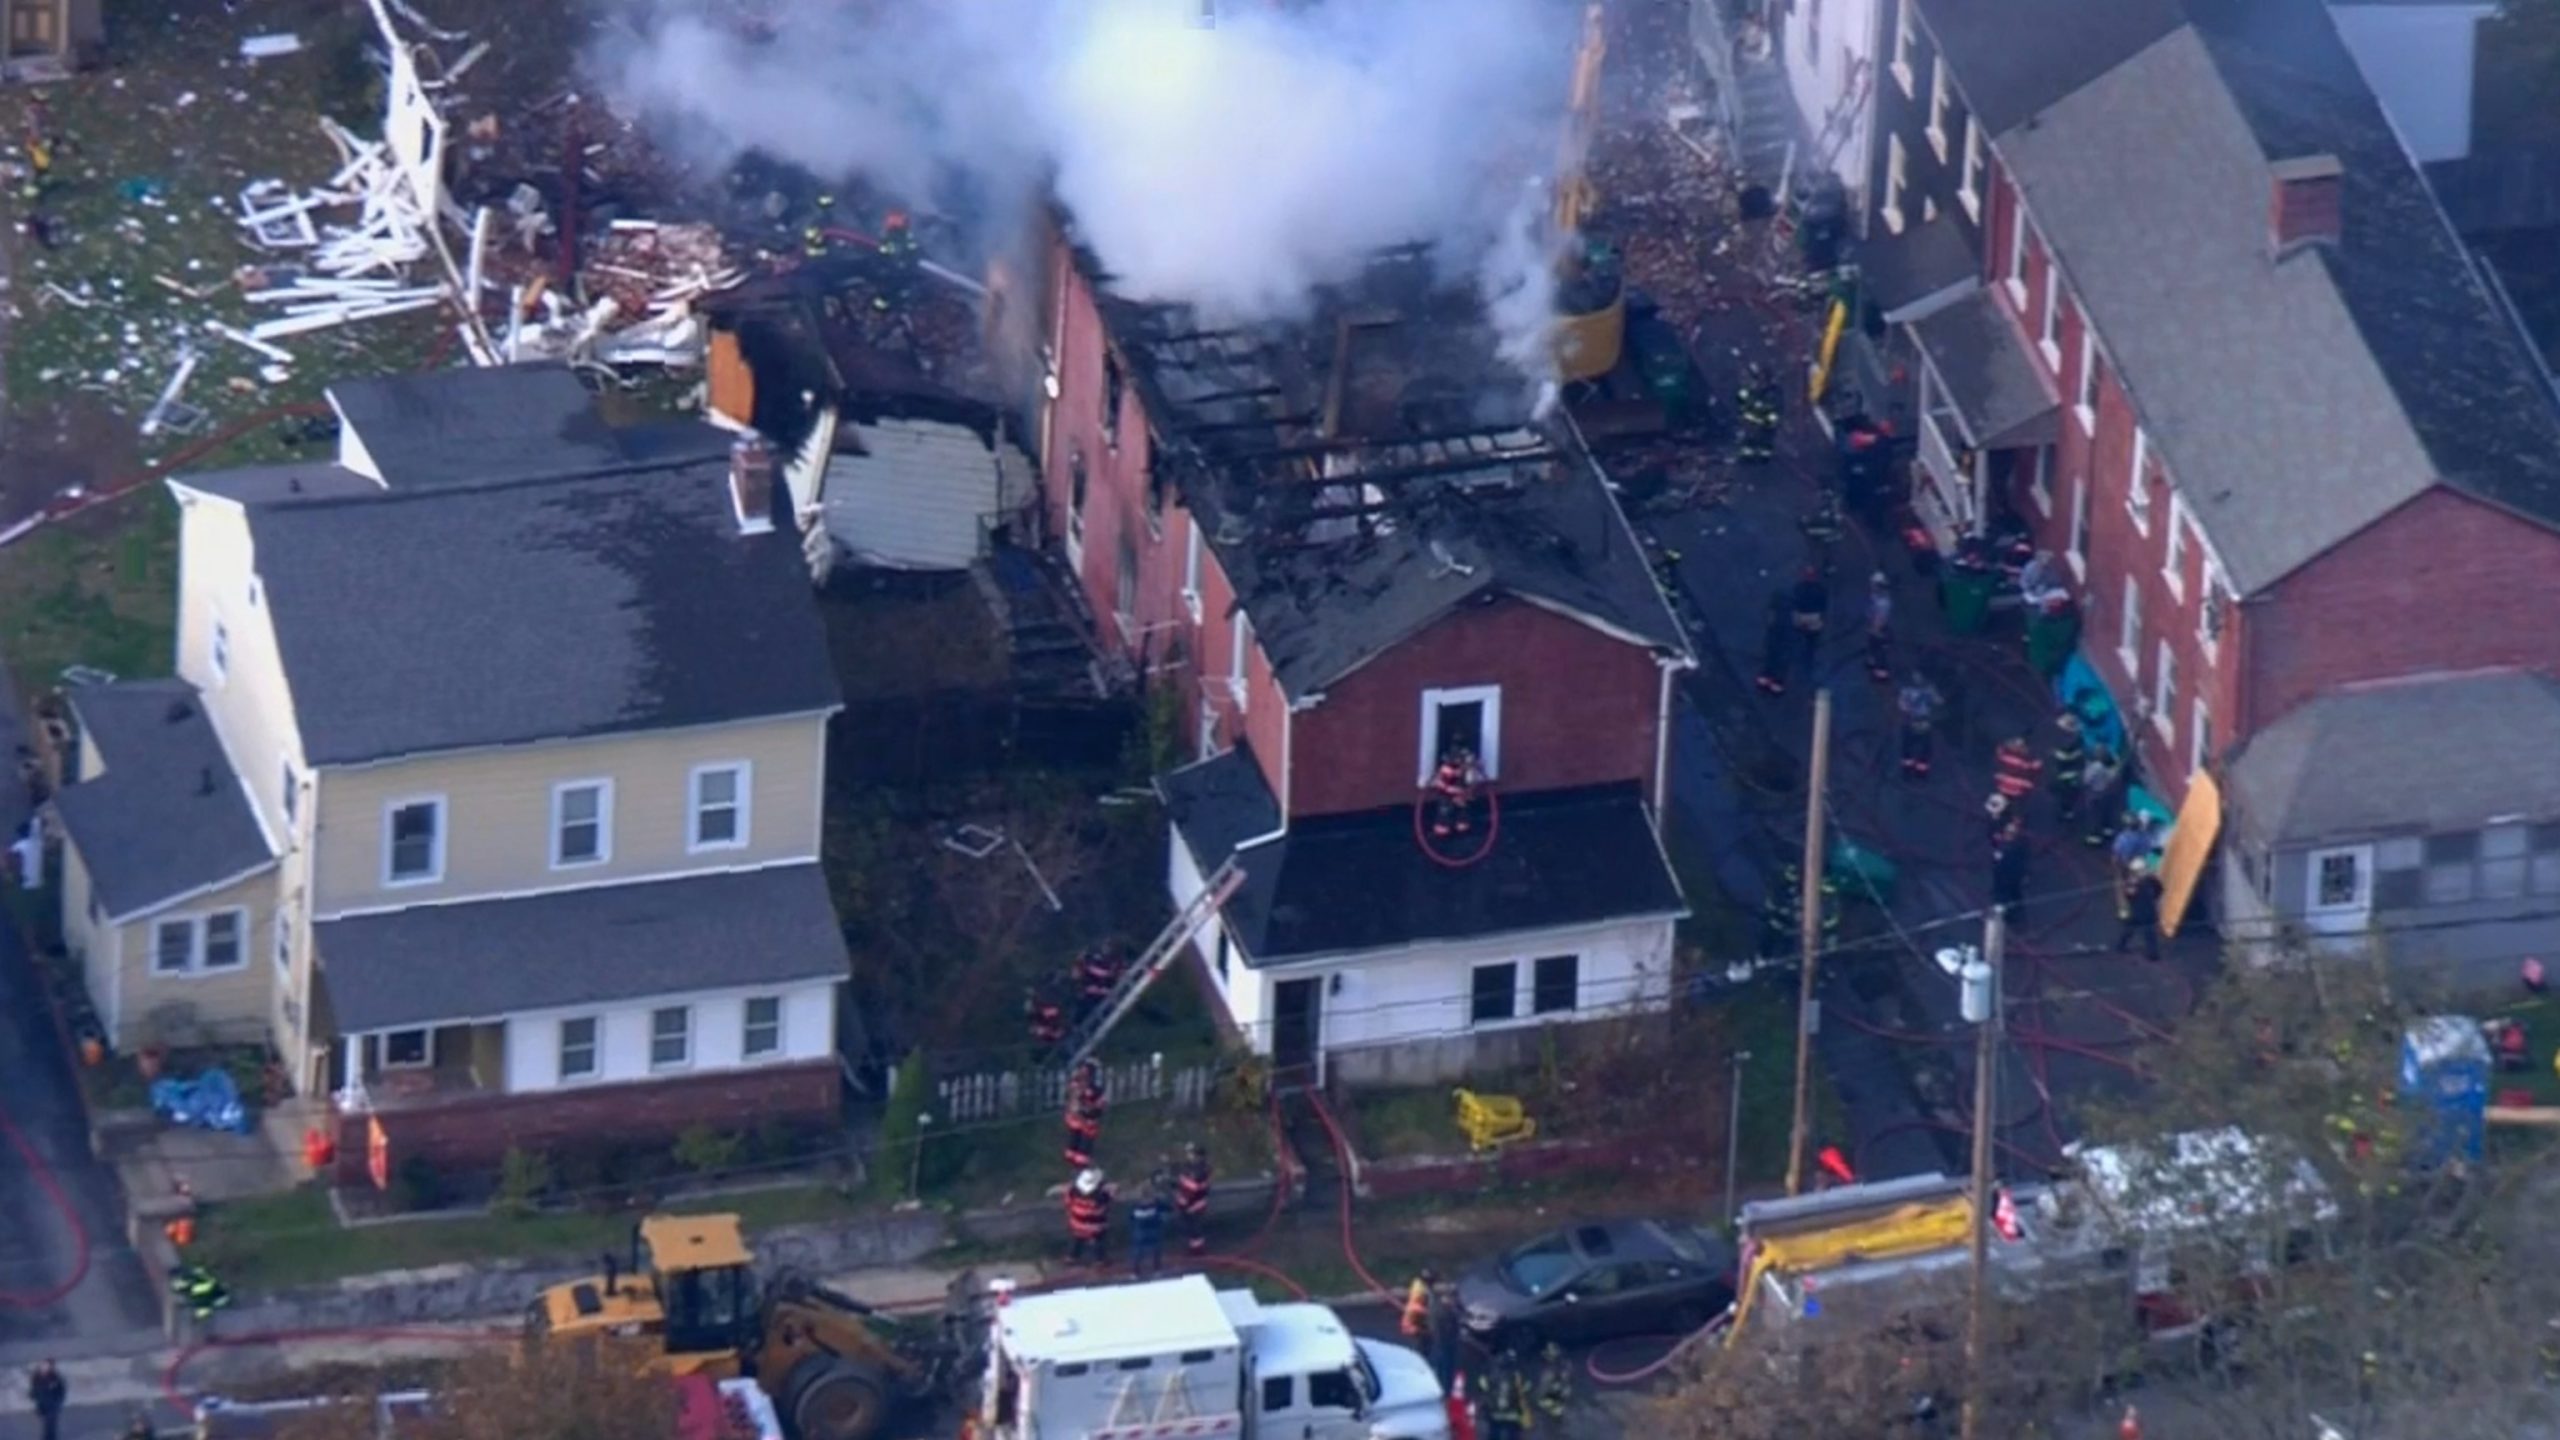 Officials report 15 injuries in New York state due to fire and building collapse caused by gas line rupture